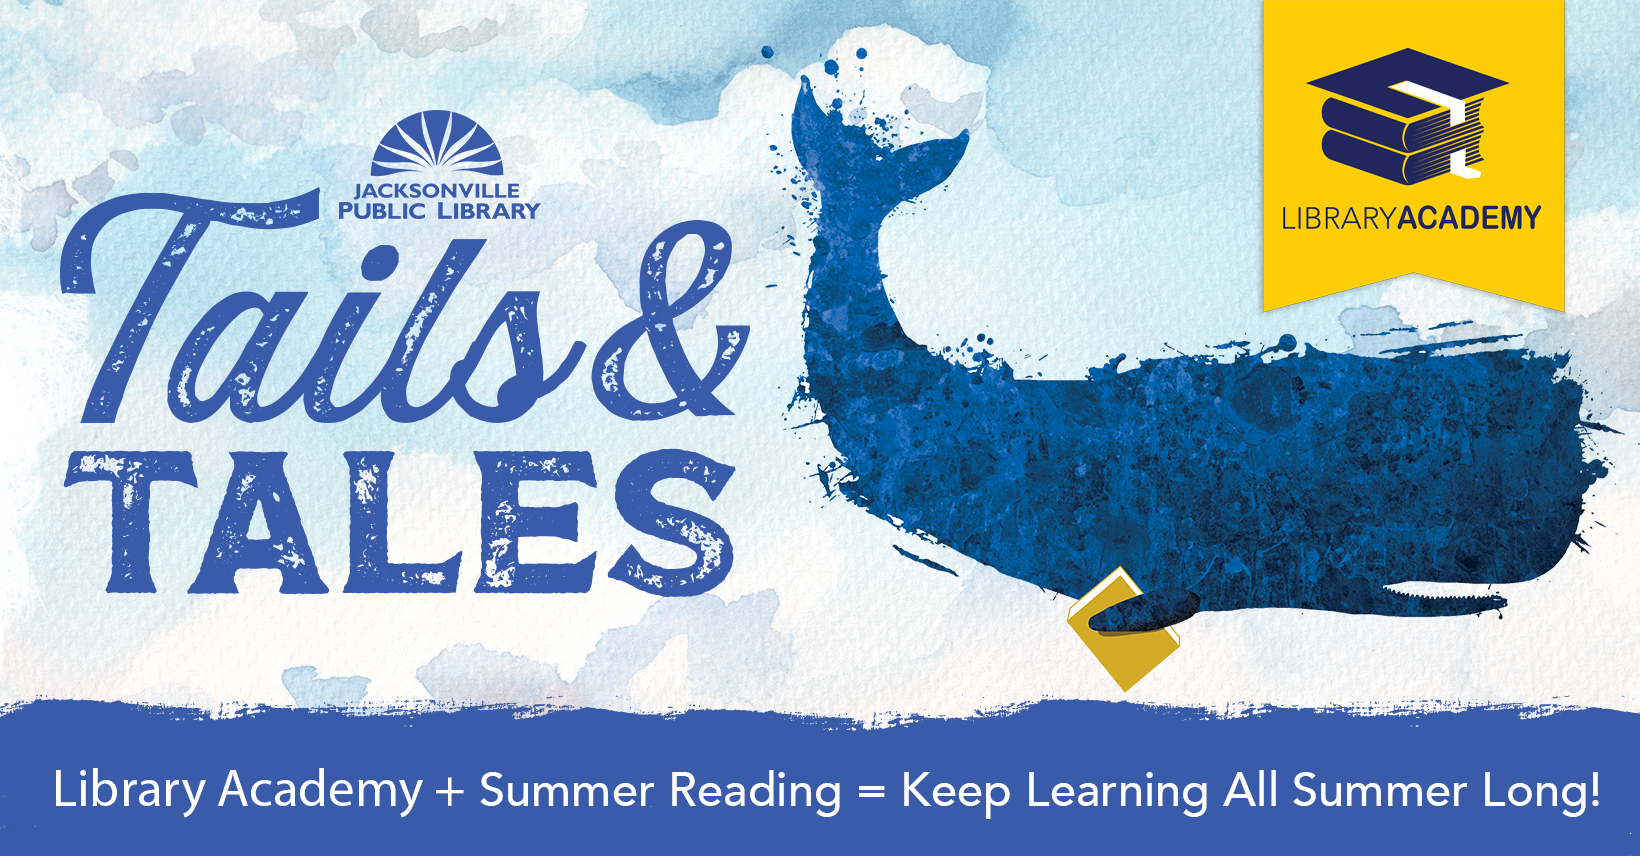 Library Academy + Summer Reading = Keep Learning All Summer Long!